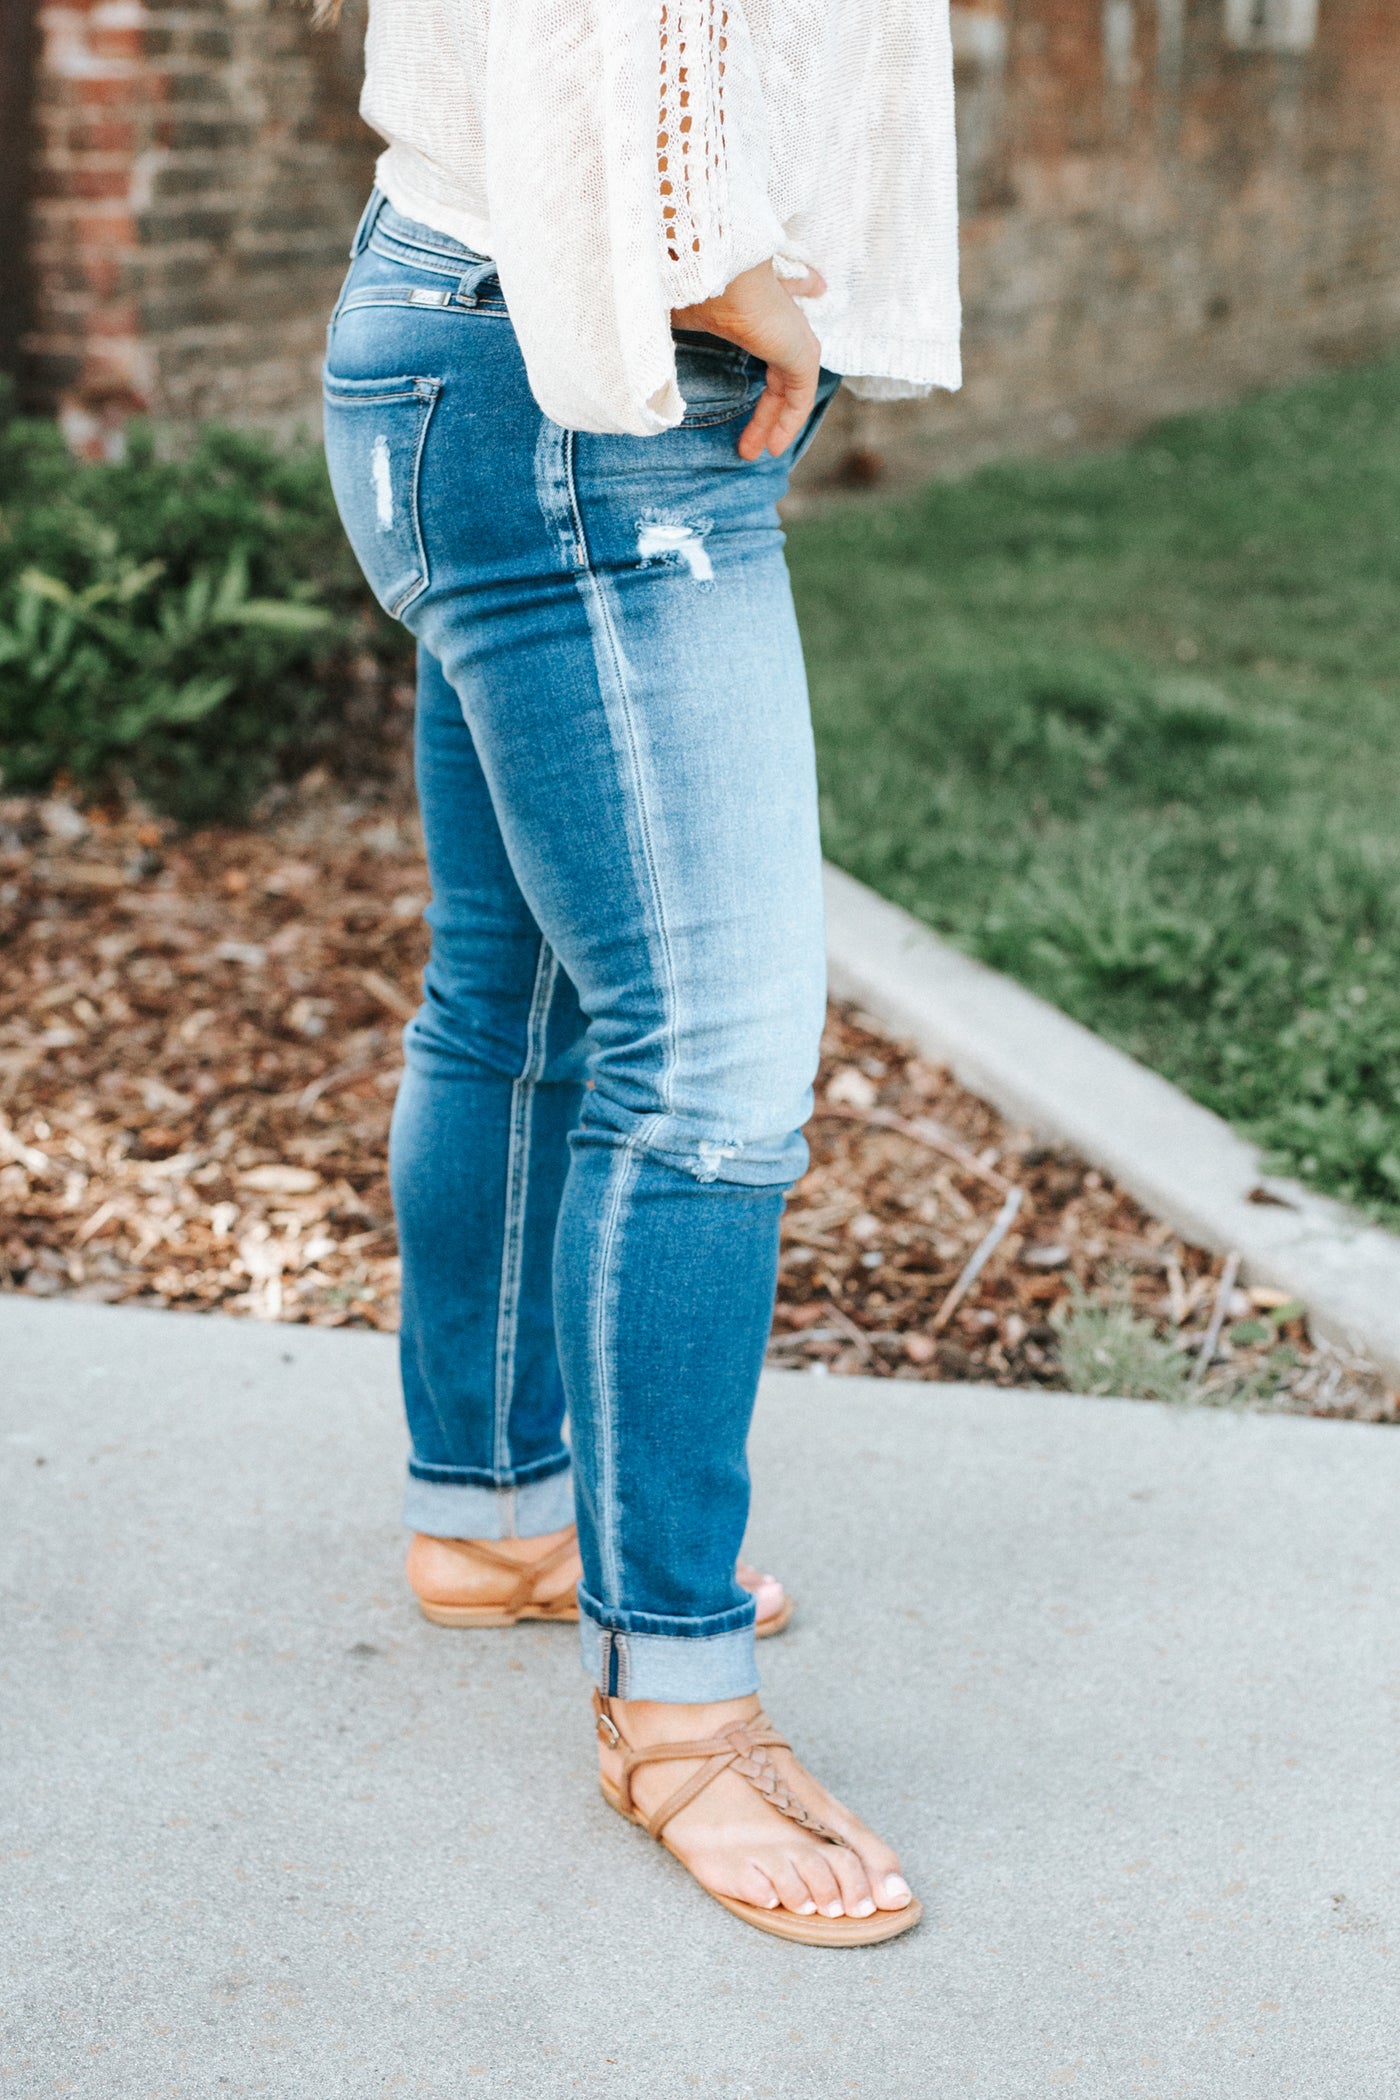 The Natalie Mid Rise Medium Wash Button Fly Jeans